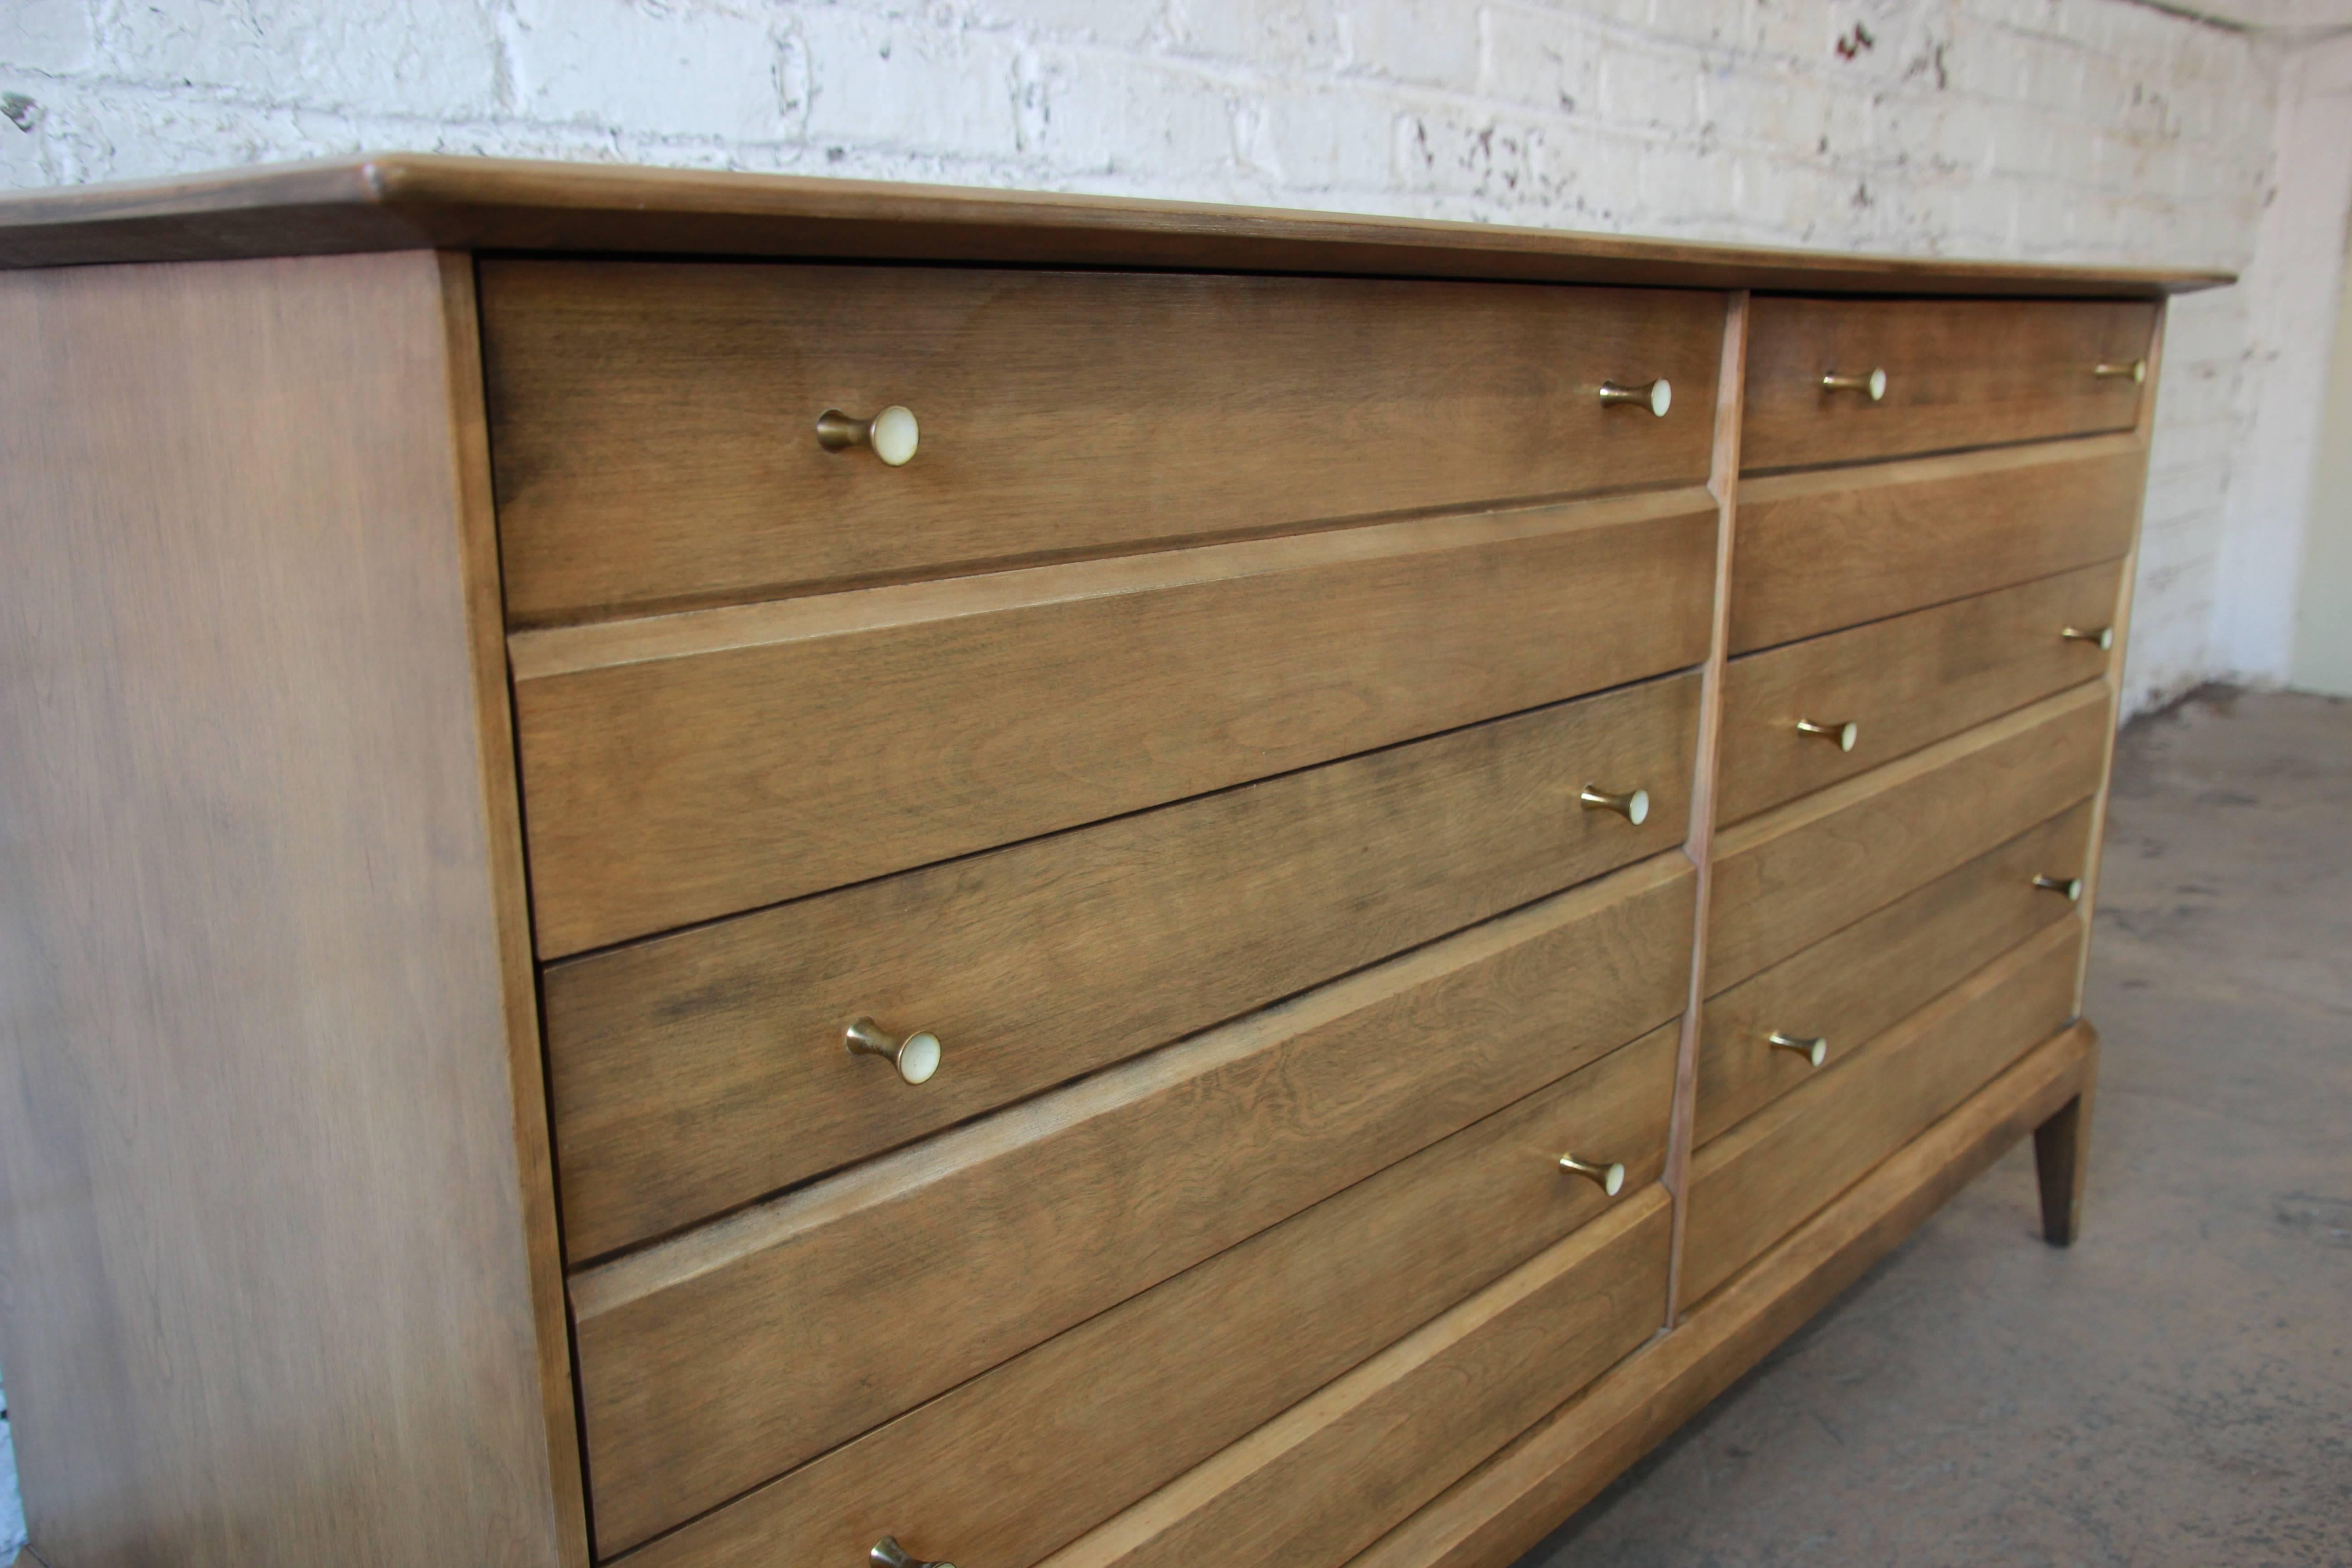 Stained Heywood Wakefield Mid-Century Cadence Six-Drawer Dresser with Mirror, 1957